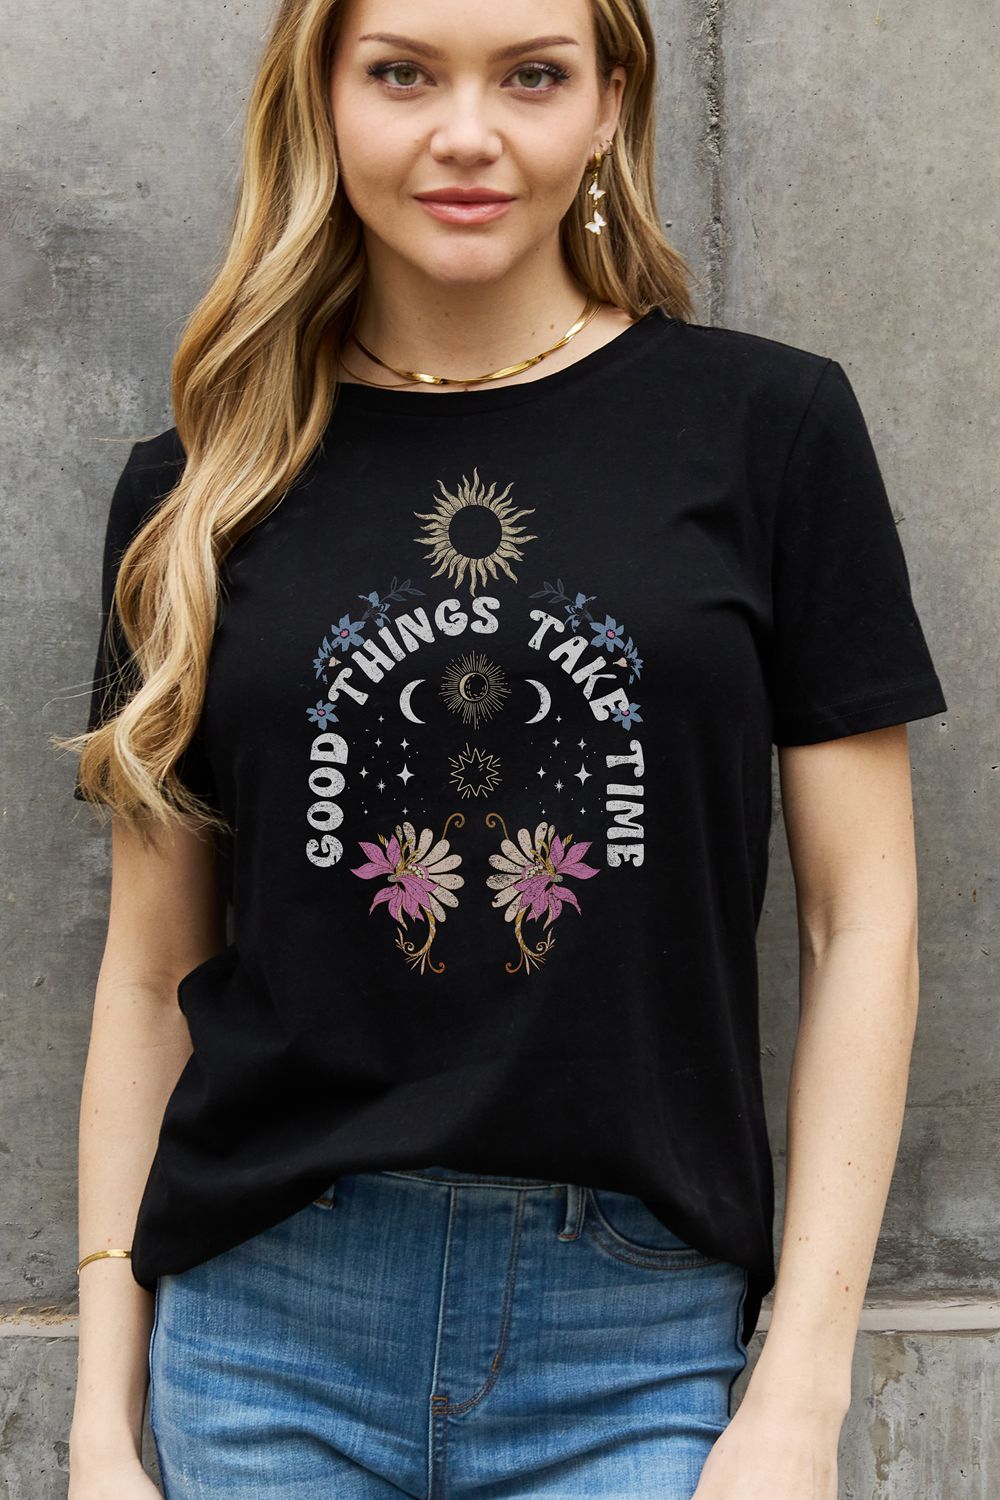 GOOD THINGS TAKE TIME Graphic Cotton Tee